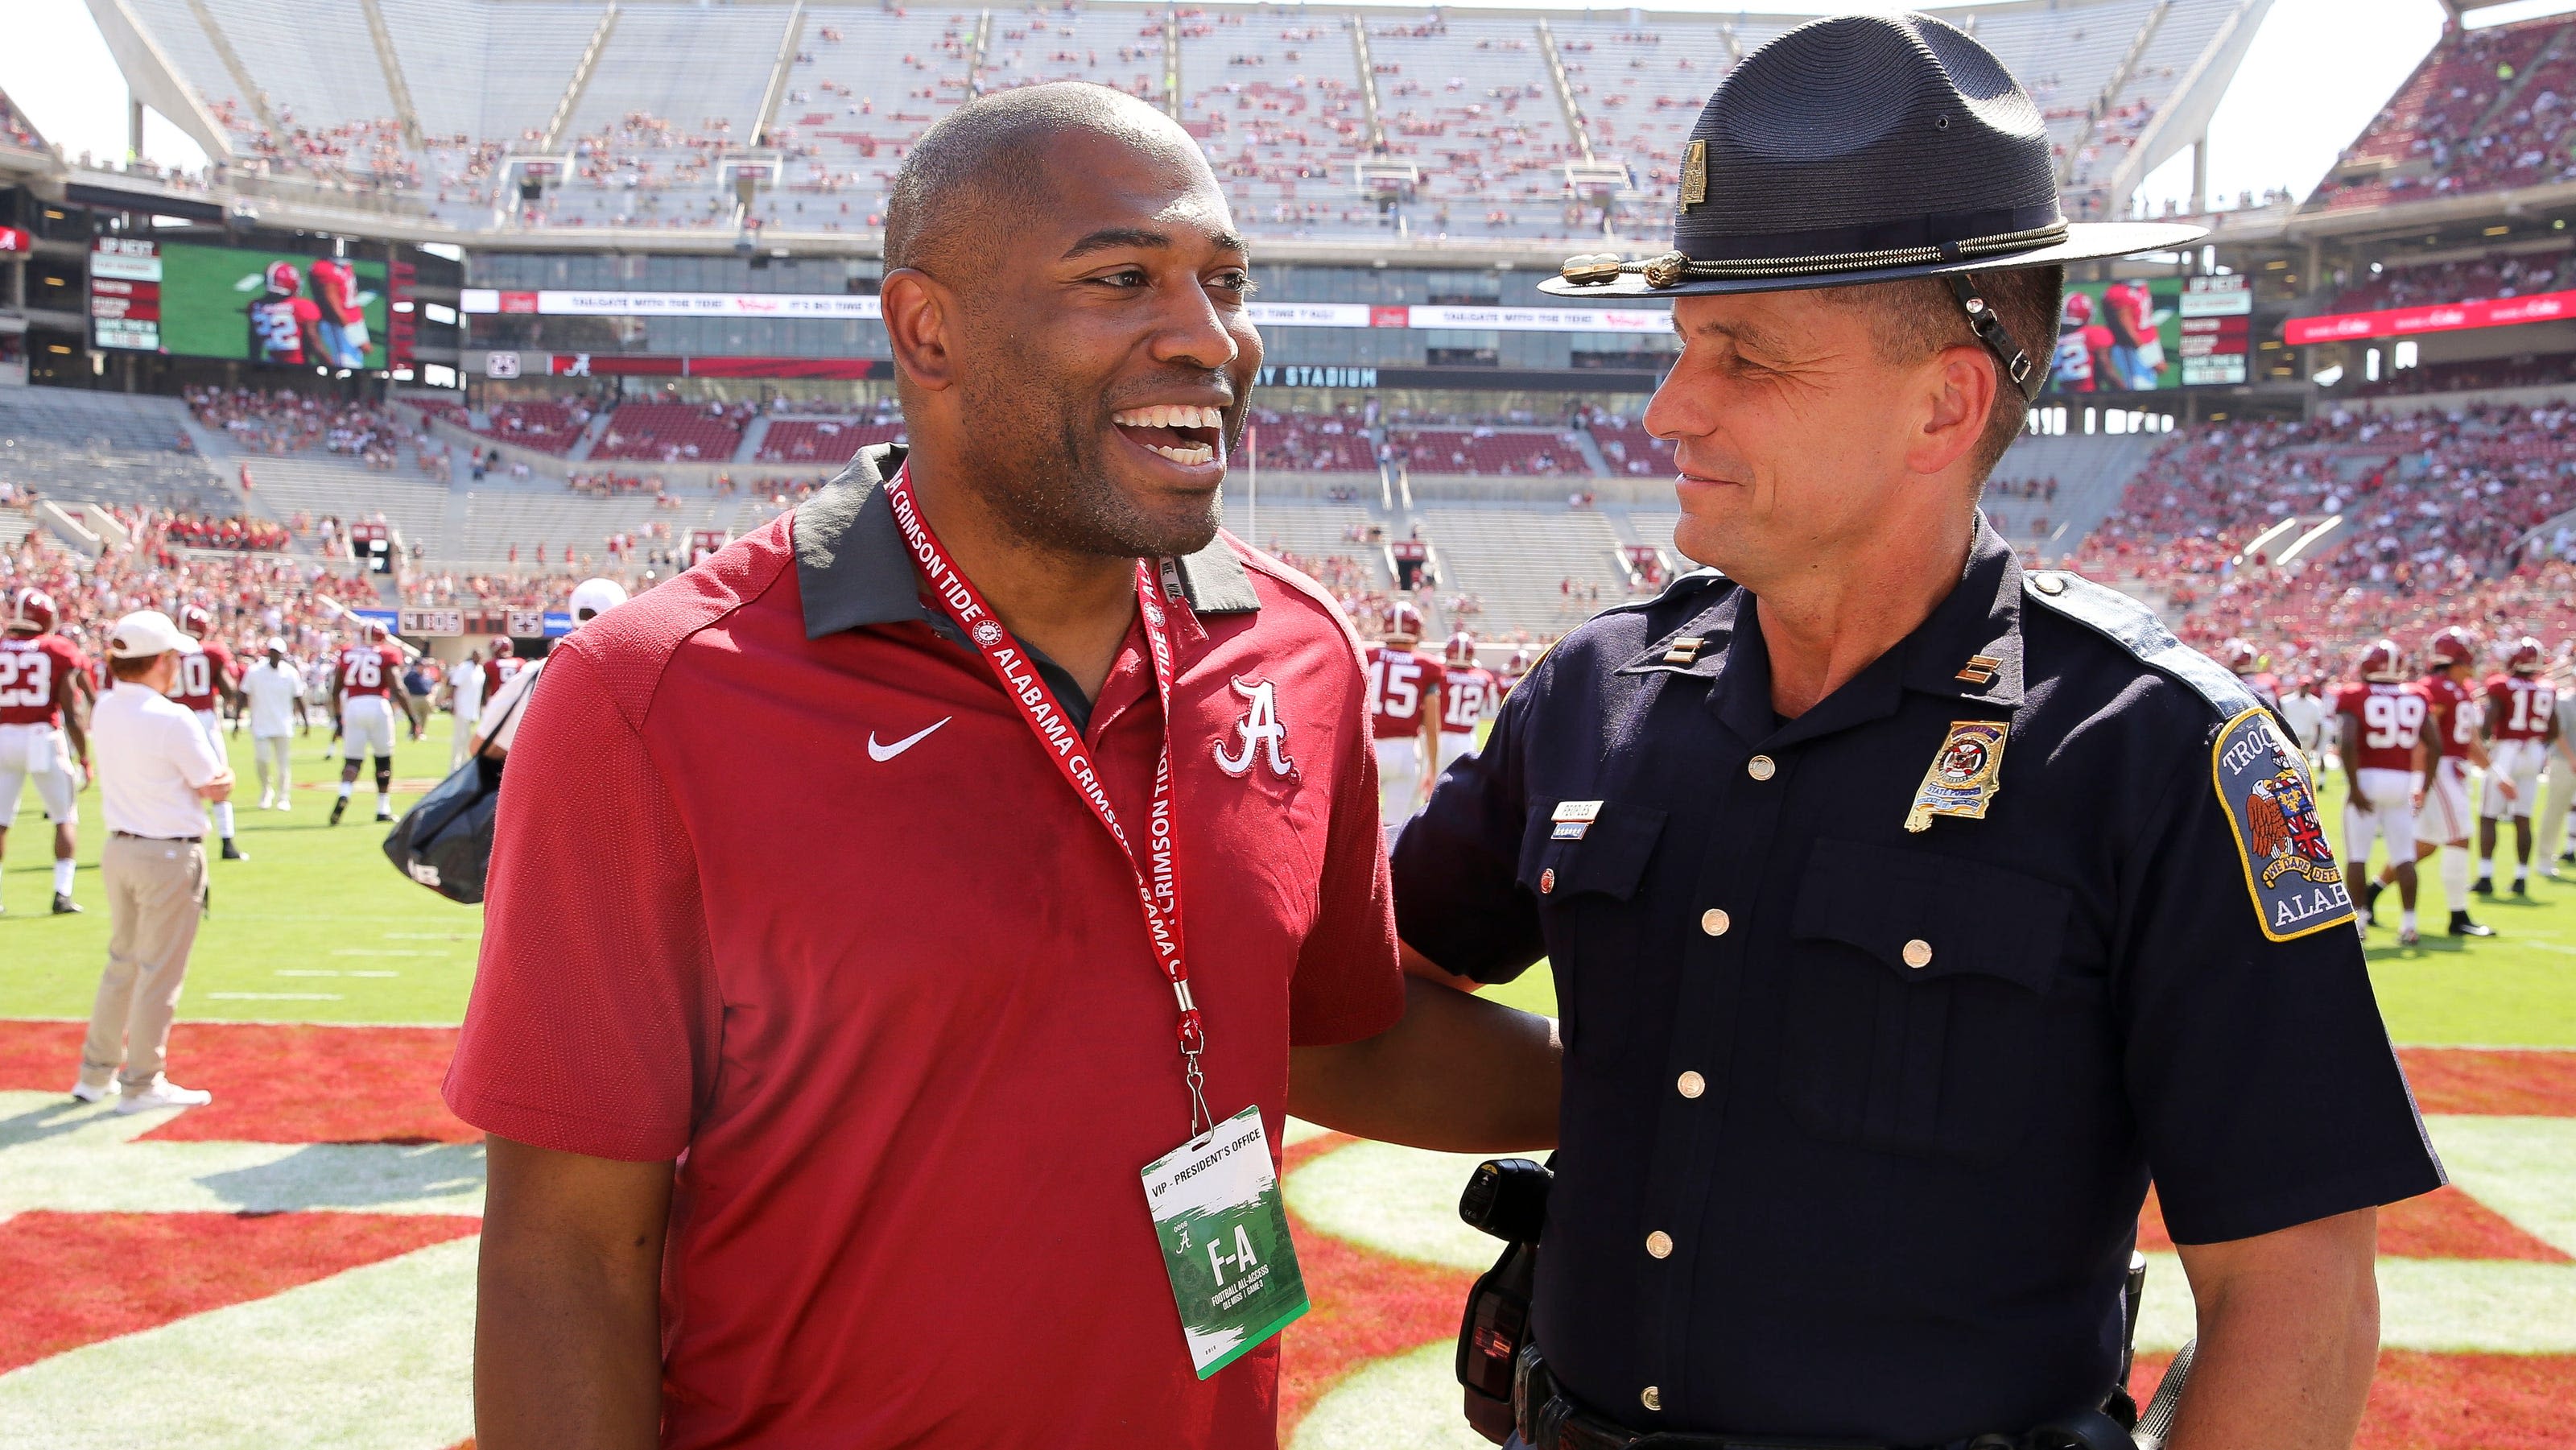 Former Alabama RB Shaun Alexander makes case for Pro Football Hall of Fame: 'One day, it should happen'